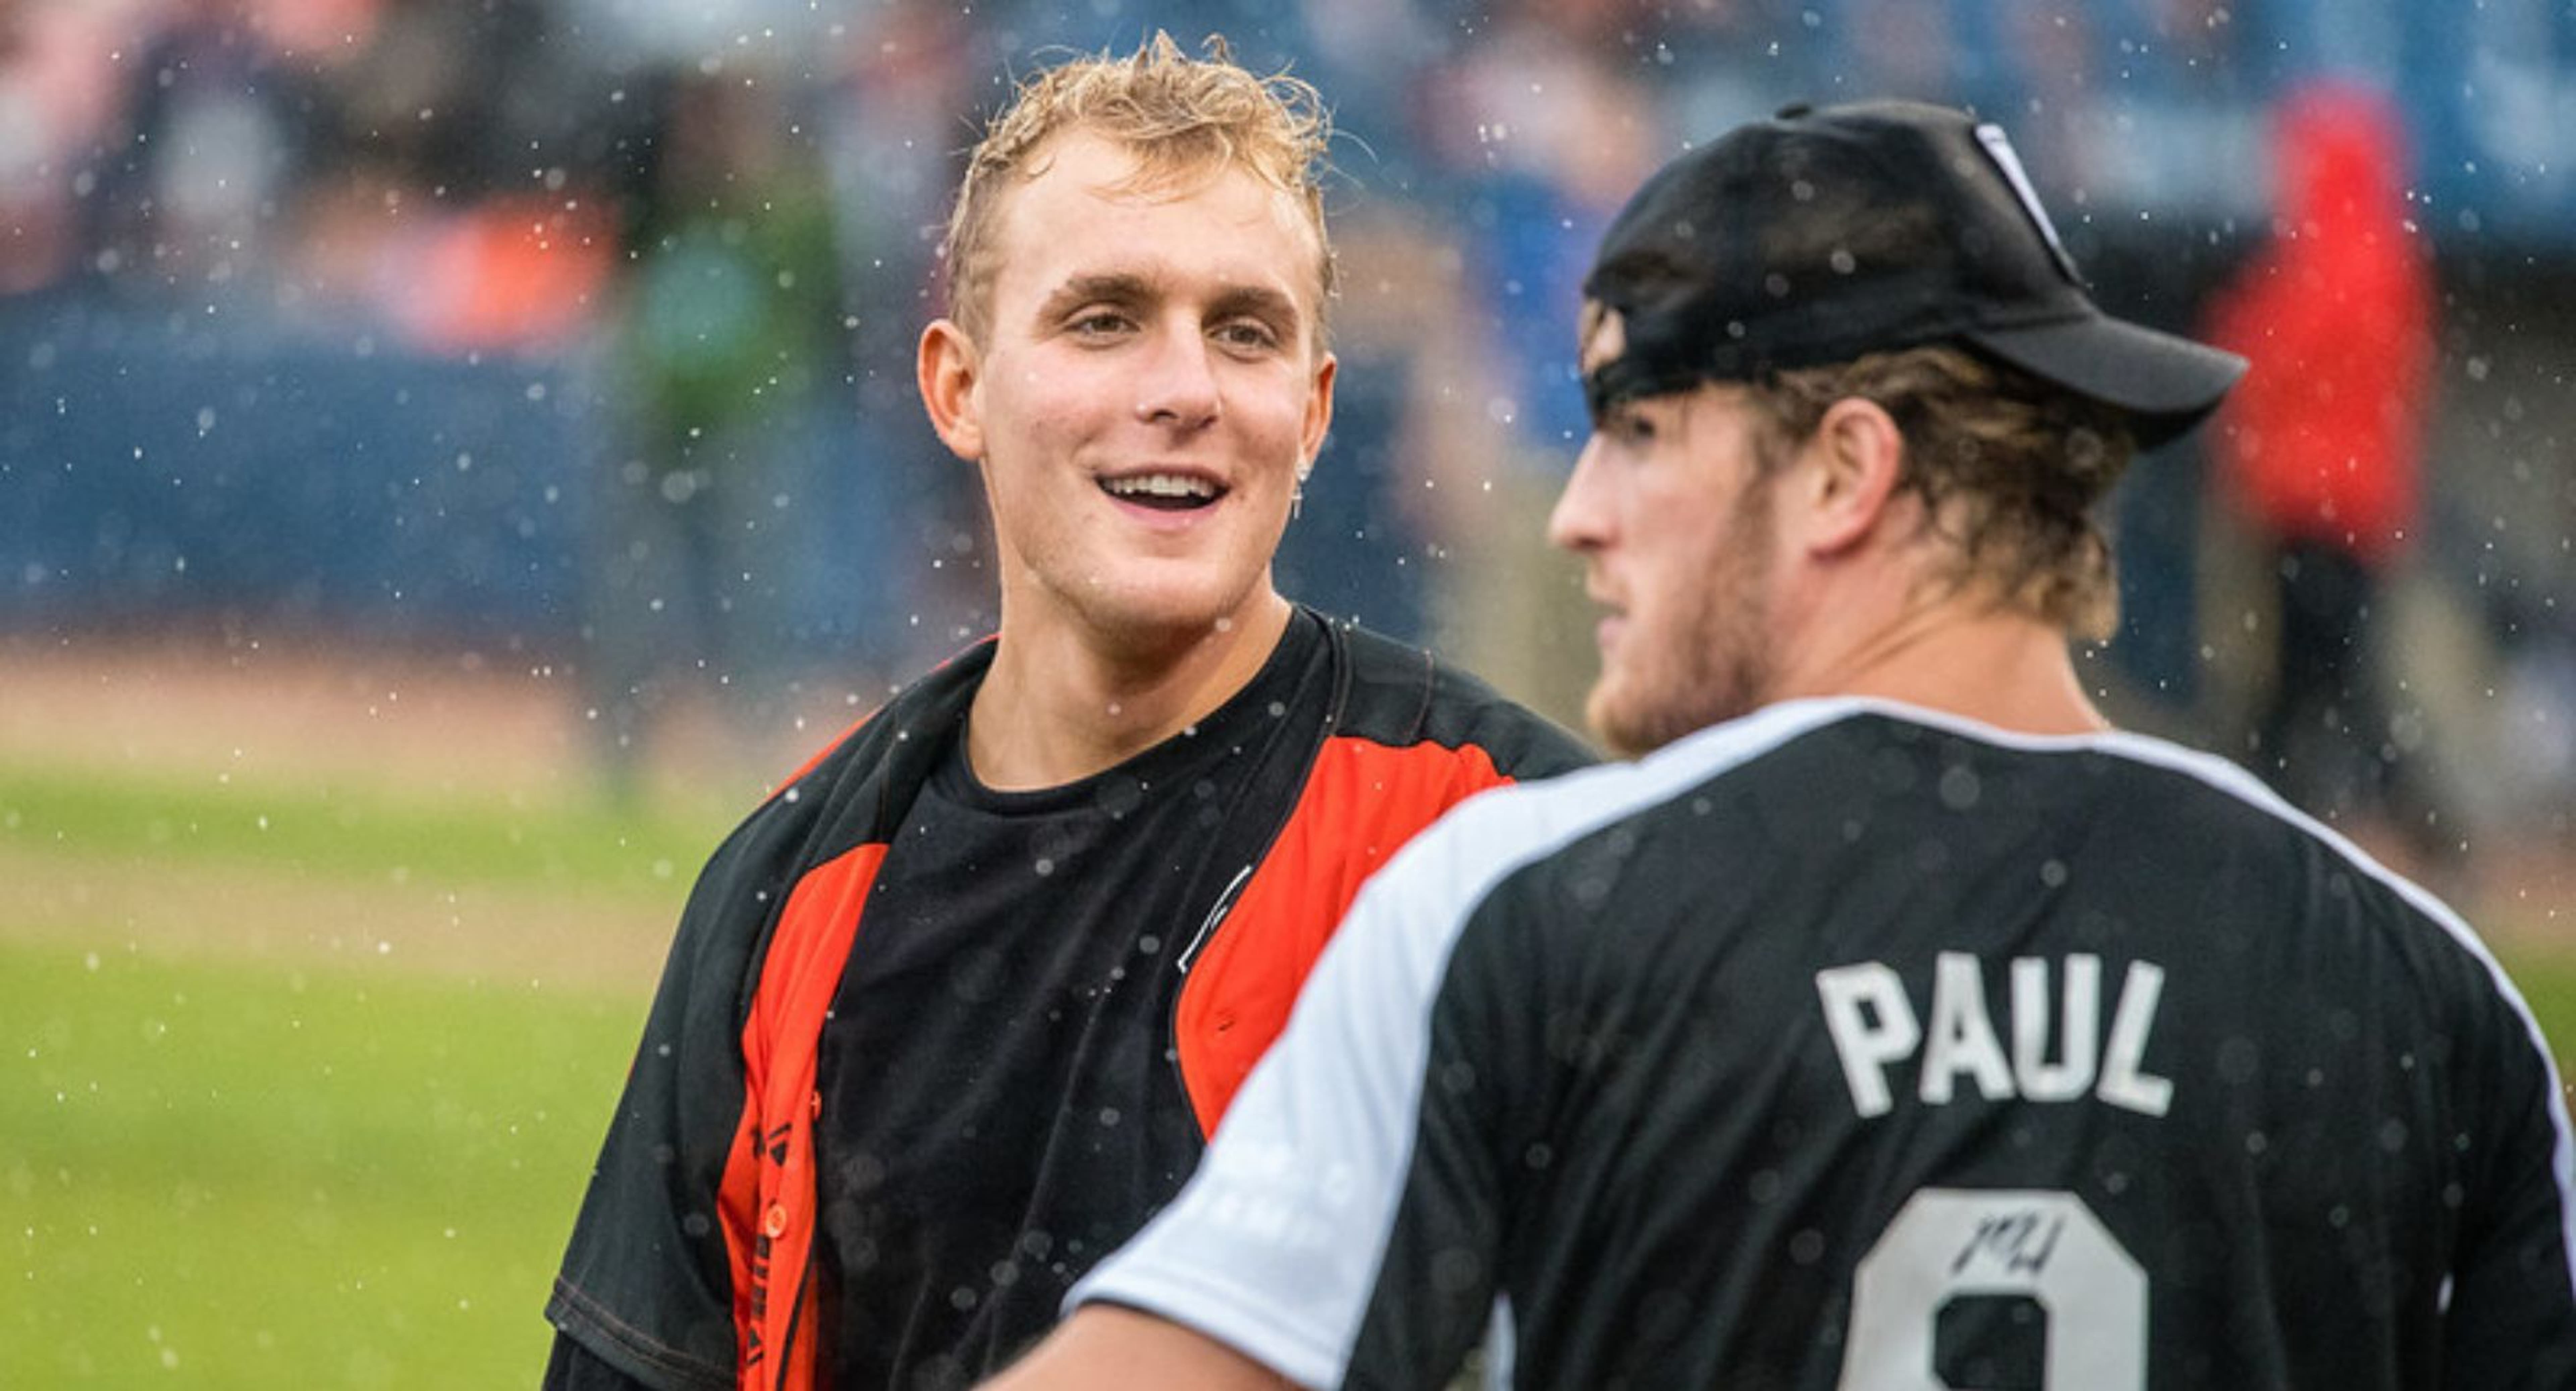 Jake Paul Aims To Make Sports Betting &#39;Betr&#39; With His New $50M Venture